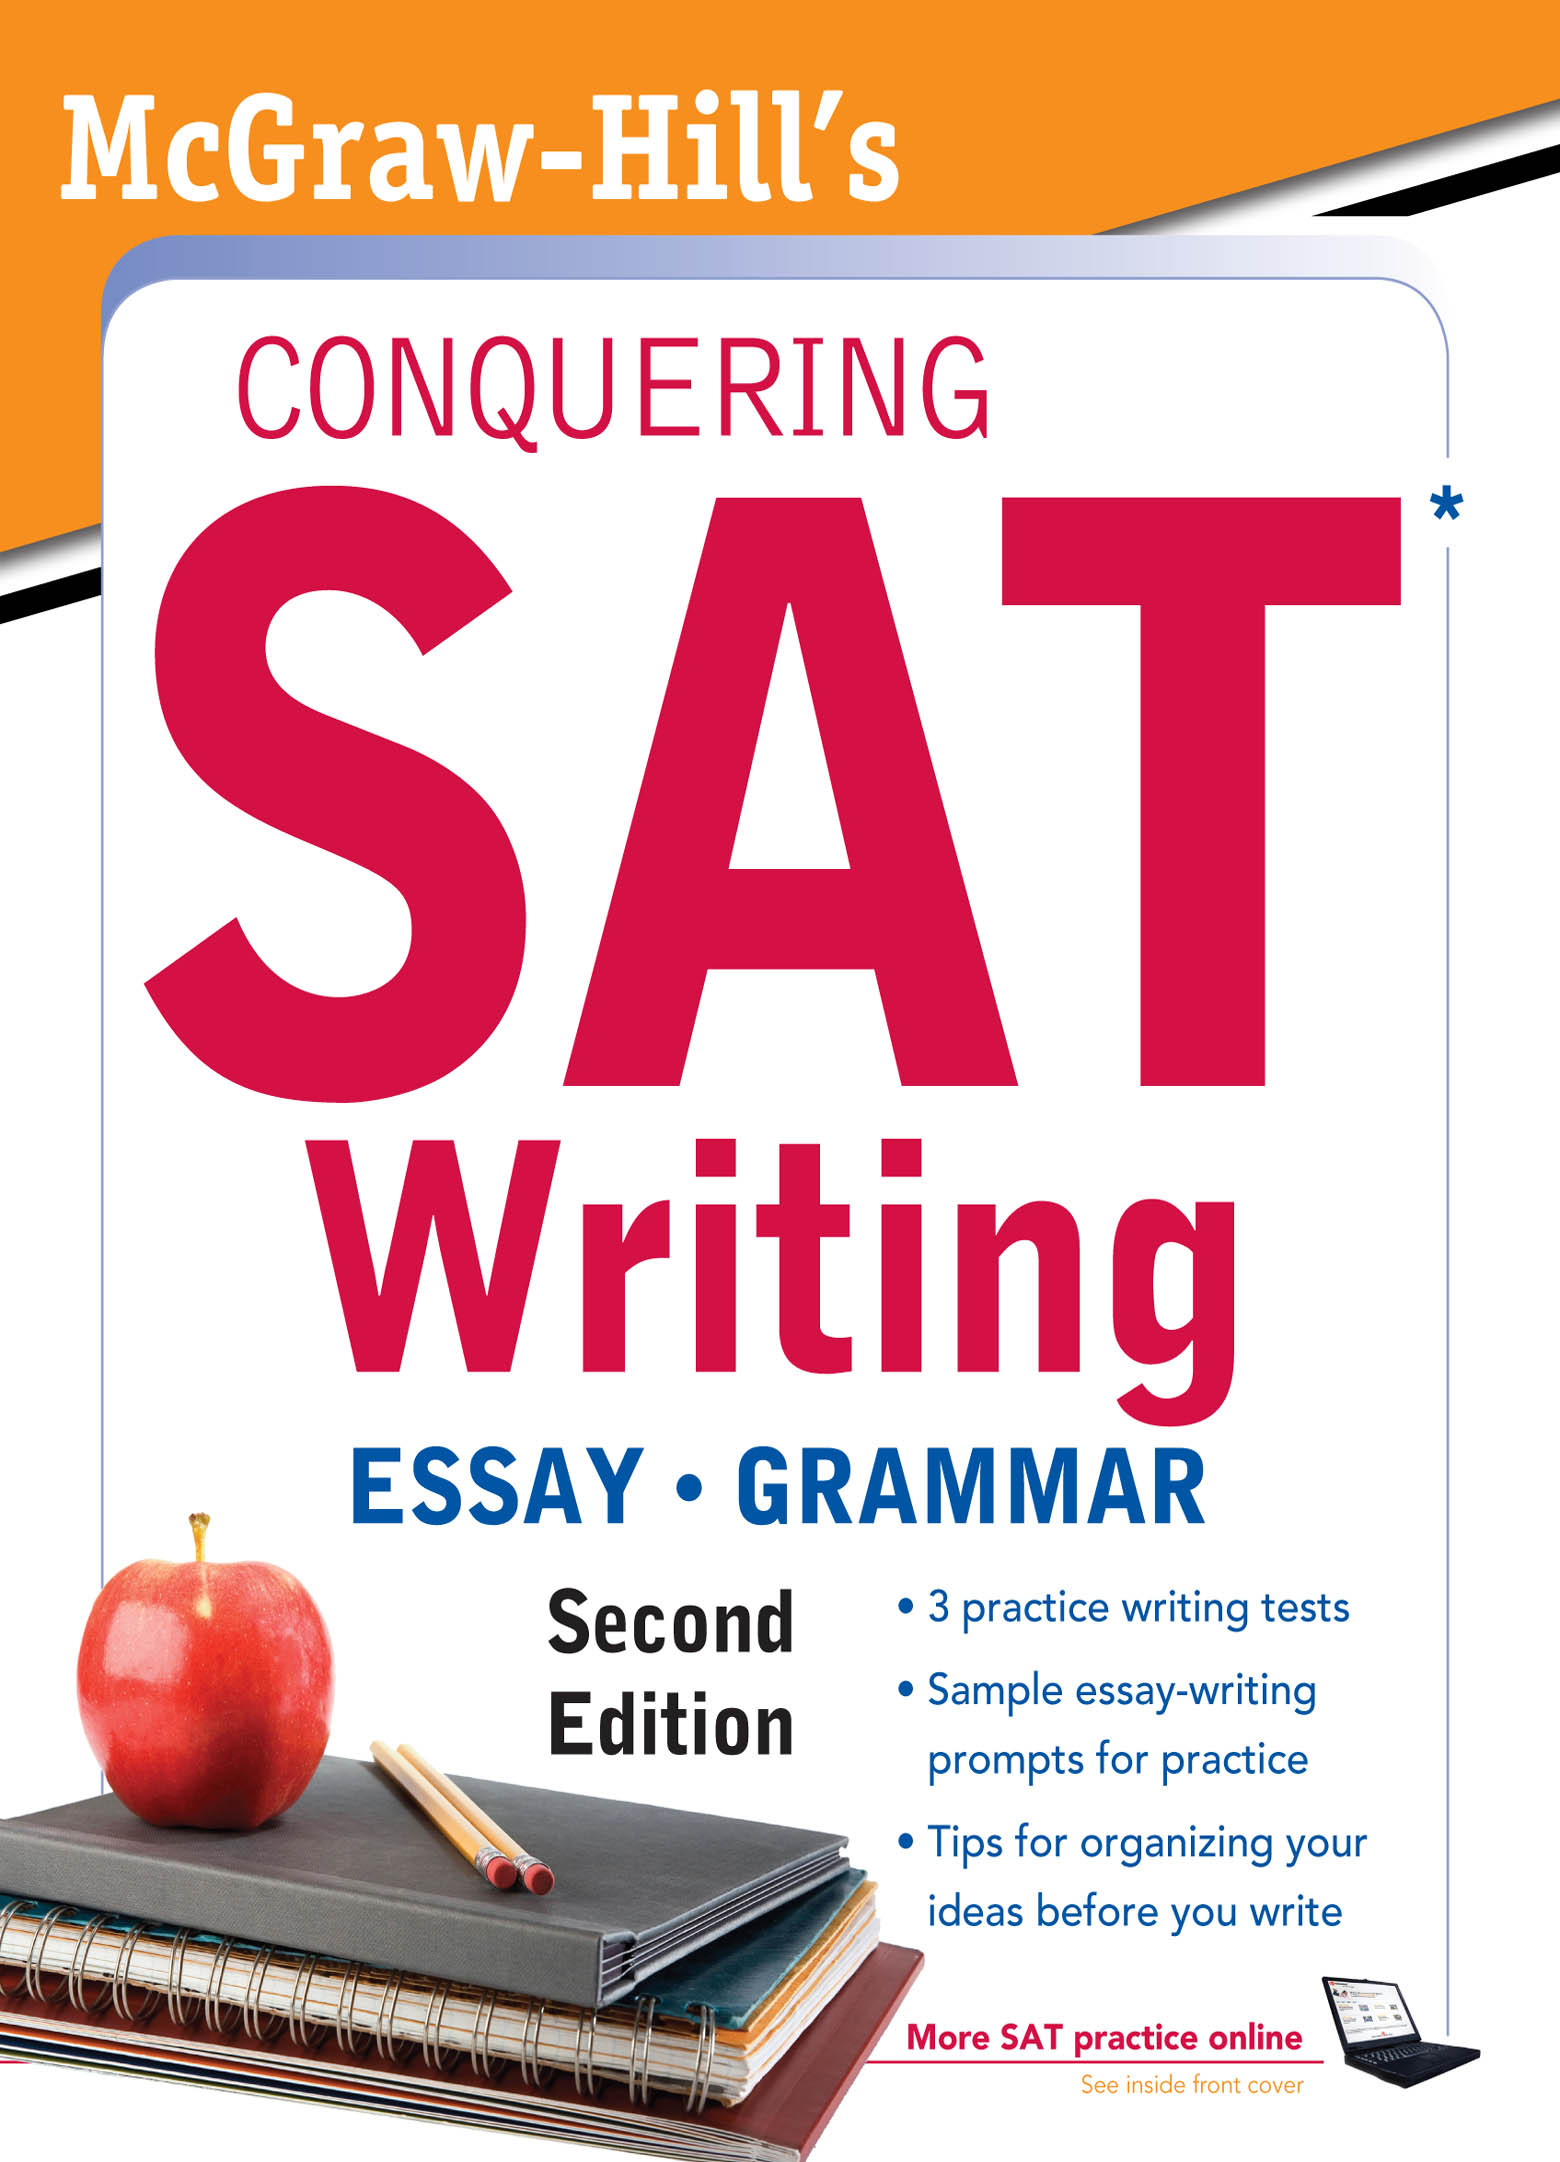 McGraw-Hill's Conquering SAT Writing, Second Edition